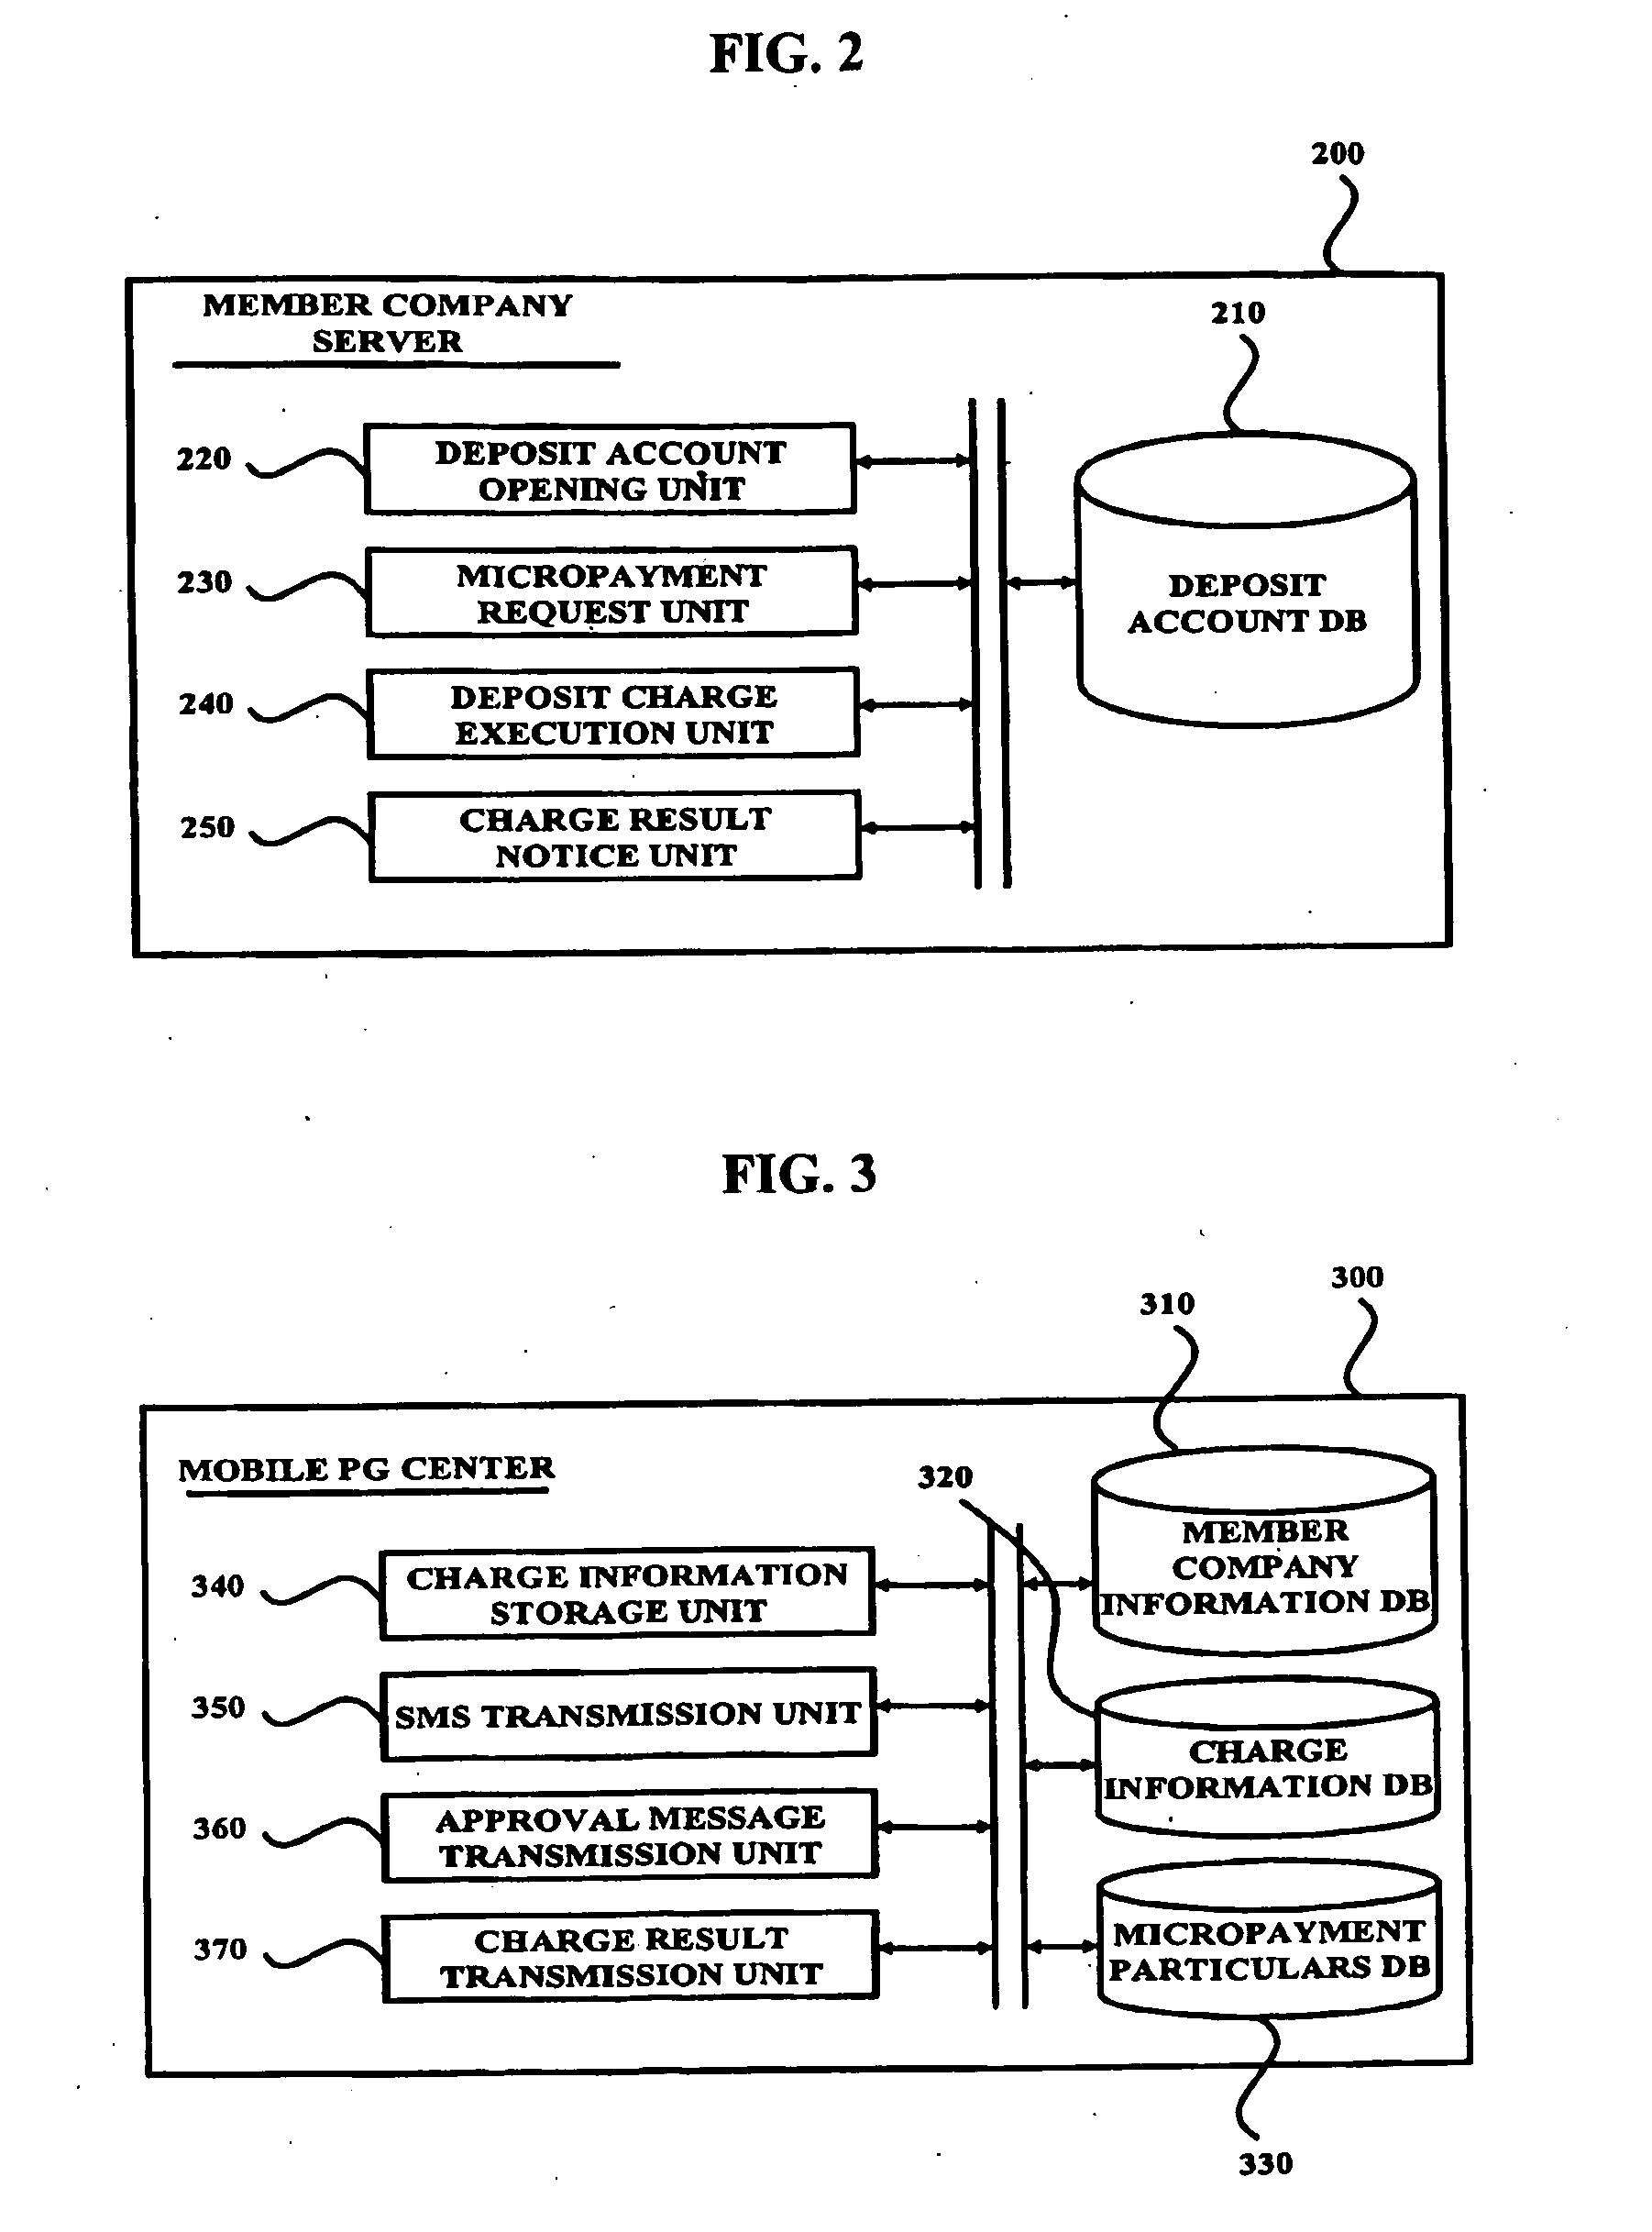 Service System and Method for Mobile Payment of Small Amount Using Virtual Caller Id